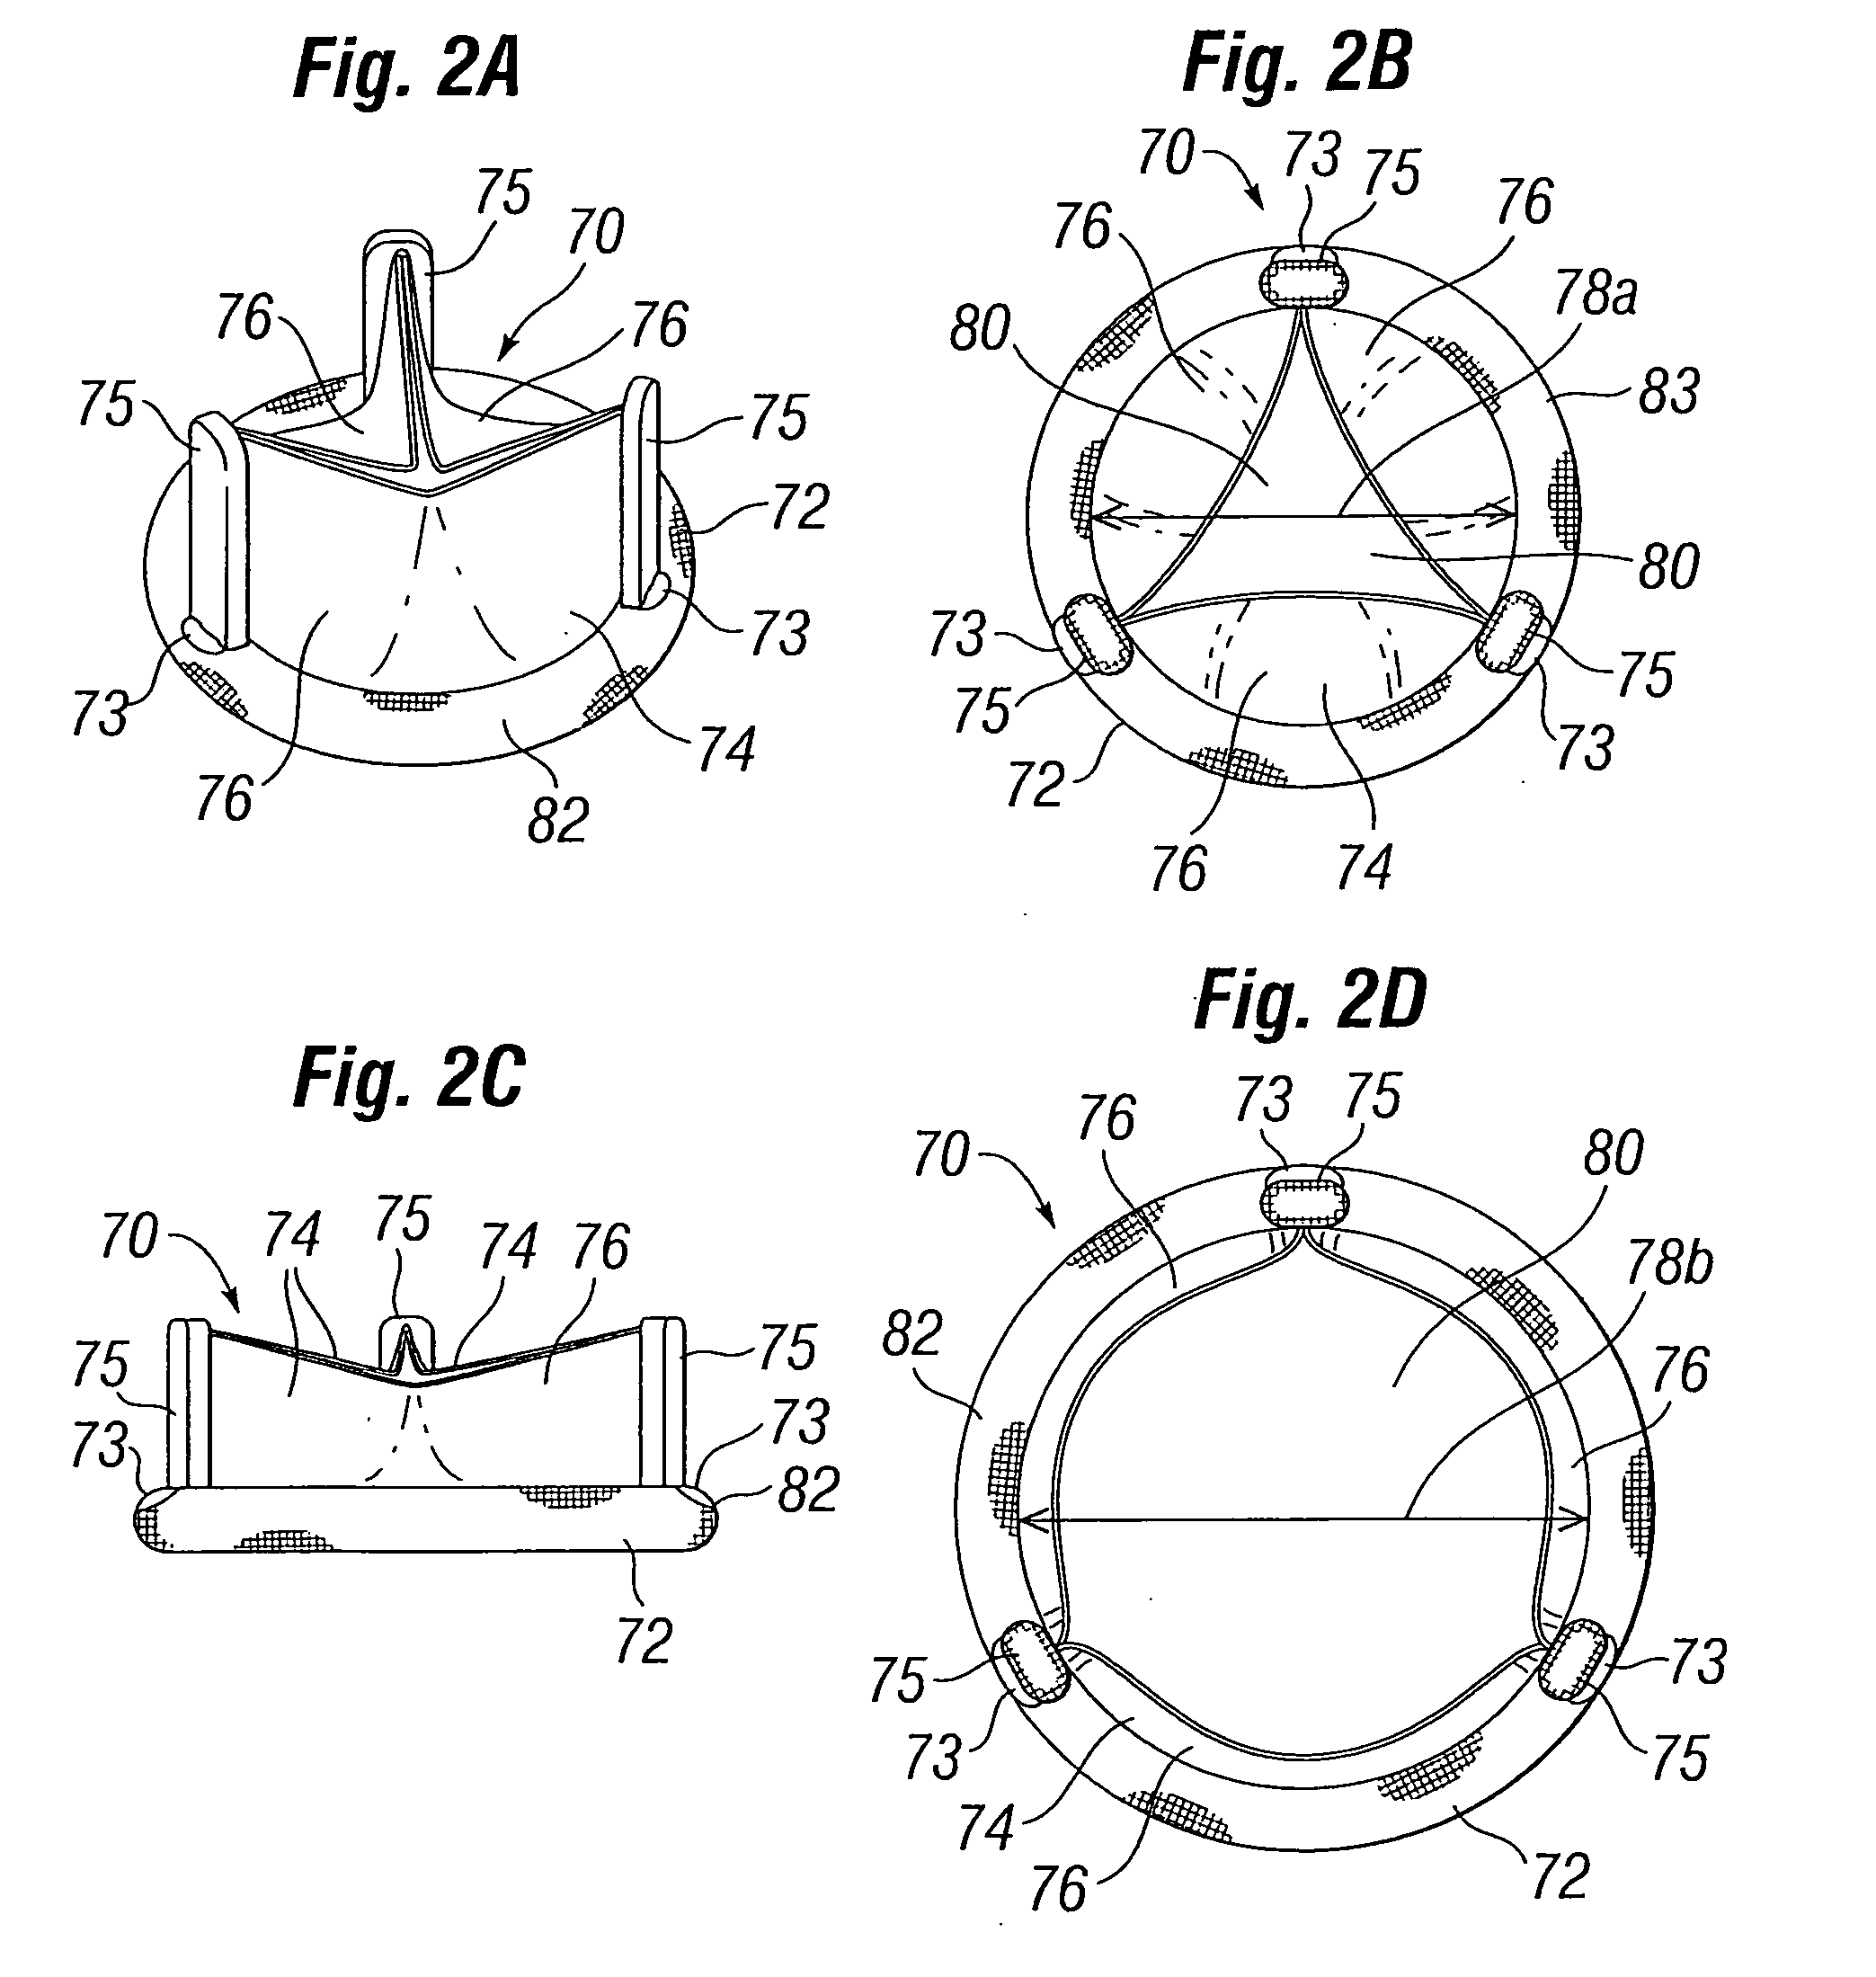 Prosthetic Heart Valve Configured to Receive a Percutaneous Prosthetic Heart Valve Implantation